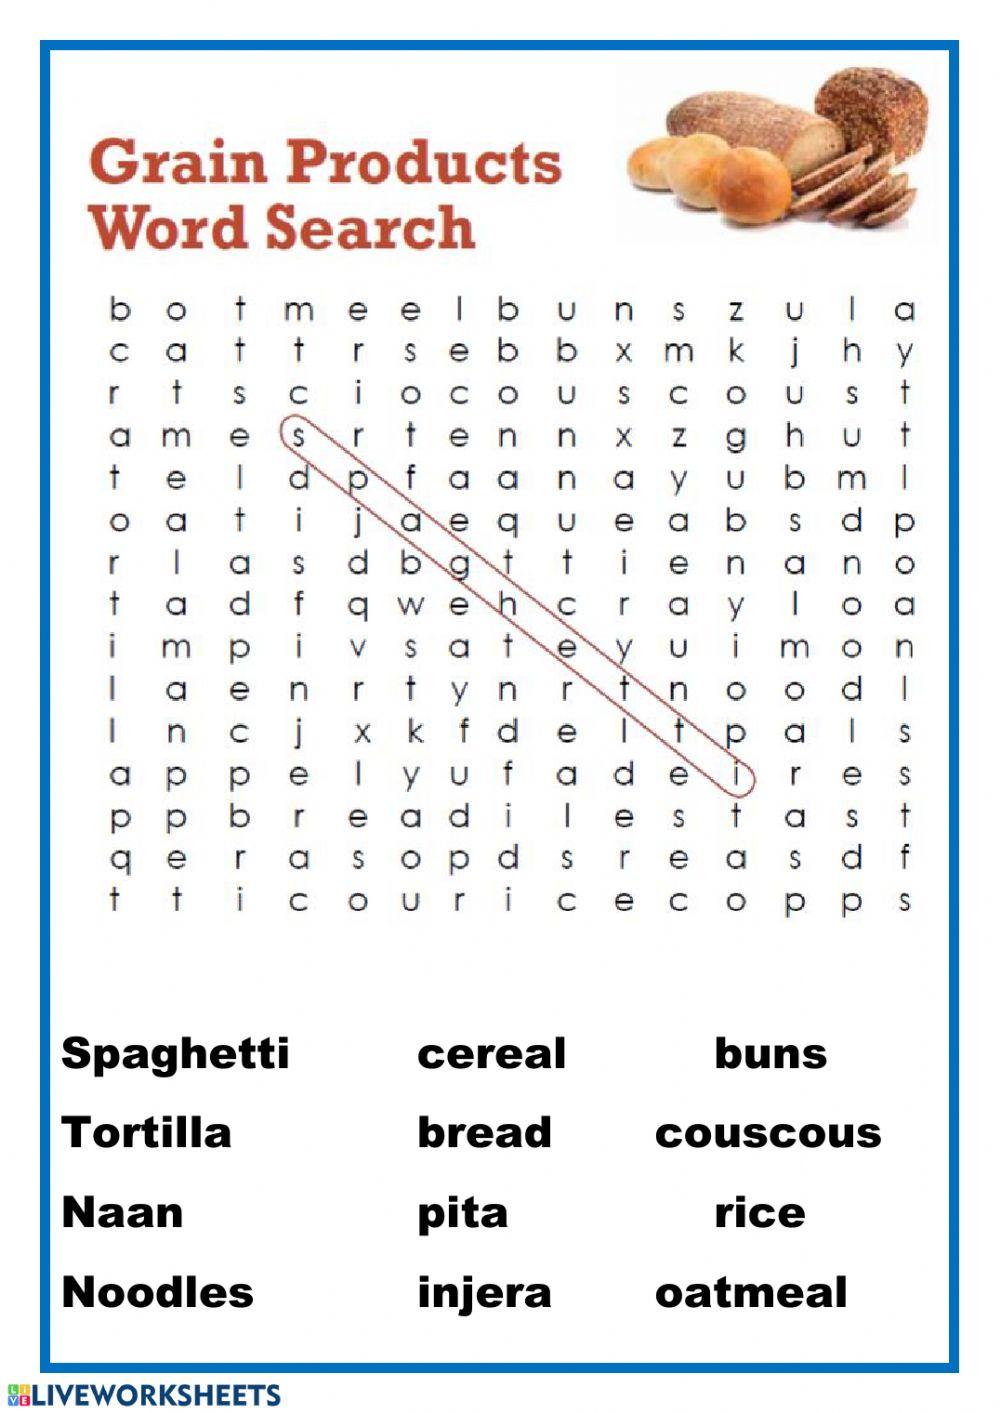 Grain products wordsearch